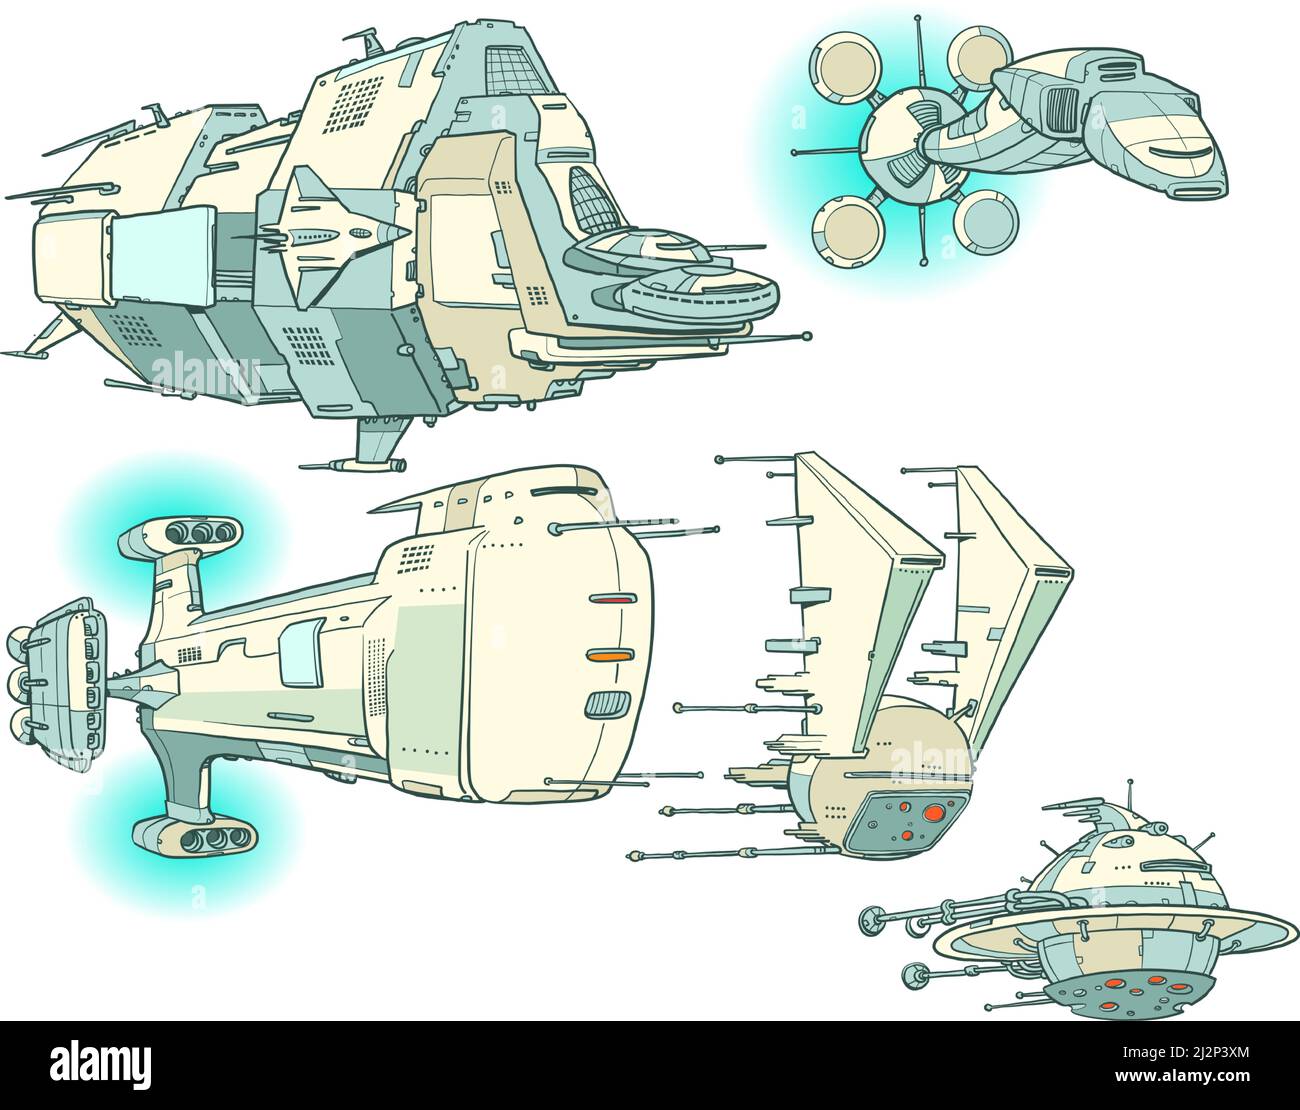 starships science fiction future, transport and military space ships Stock Vector